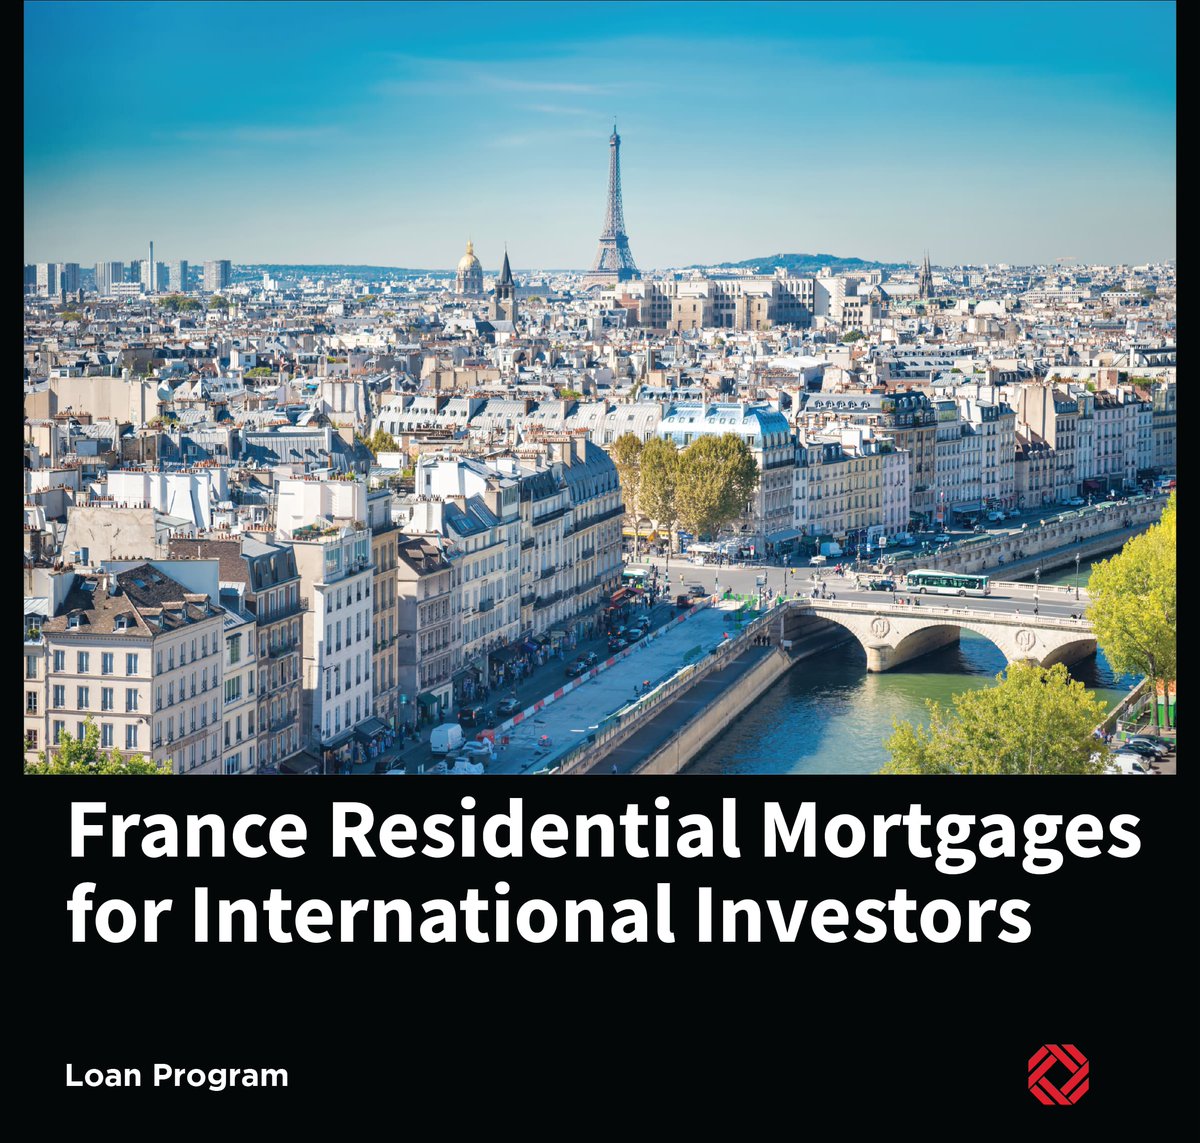 France Residential Mortgages for International Investors

Our team of specialists offers direct French Bank and private lending and understands the requirements of our International Clientele.

hello@gmg.asia
.
.
#frenchriveria #france #cotedazur #mediterranean #southoffrance